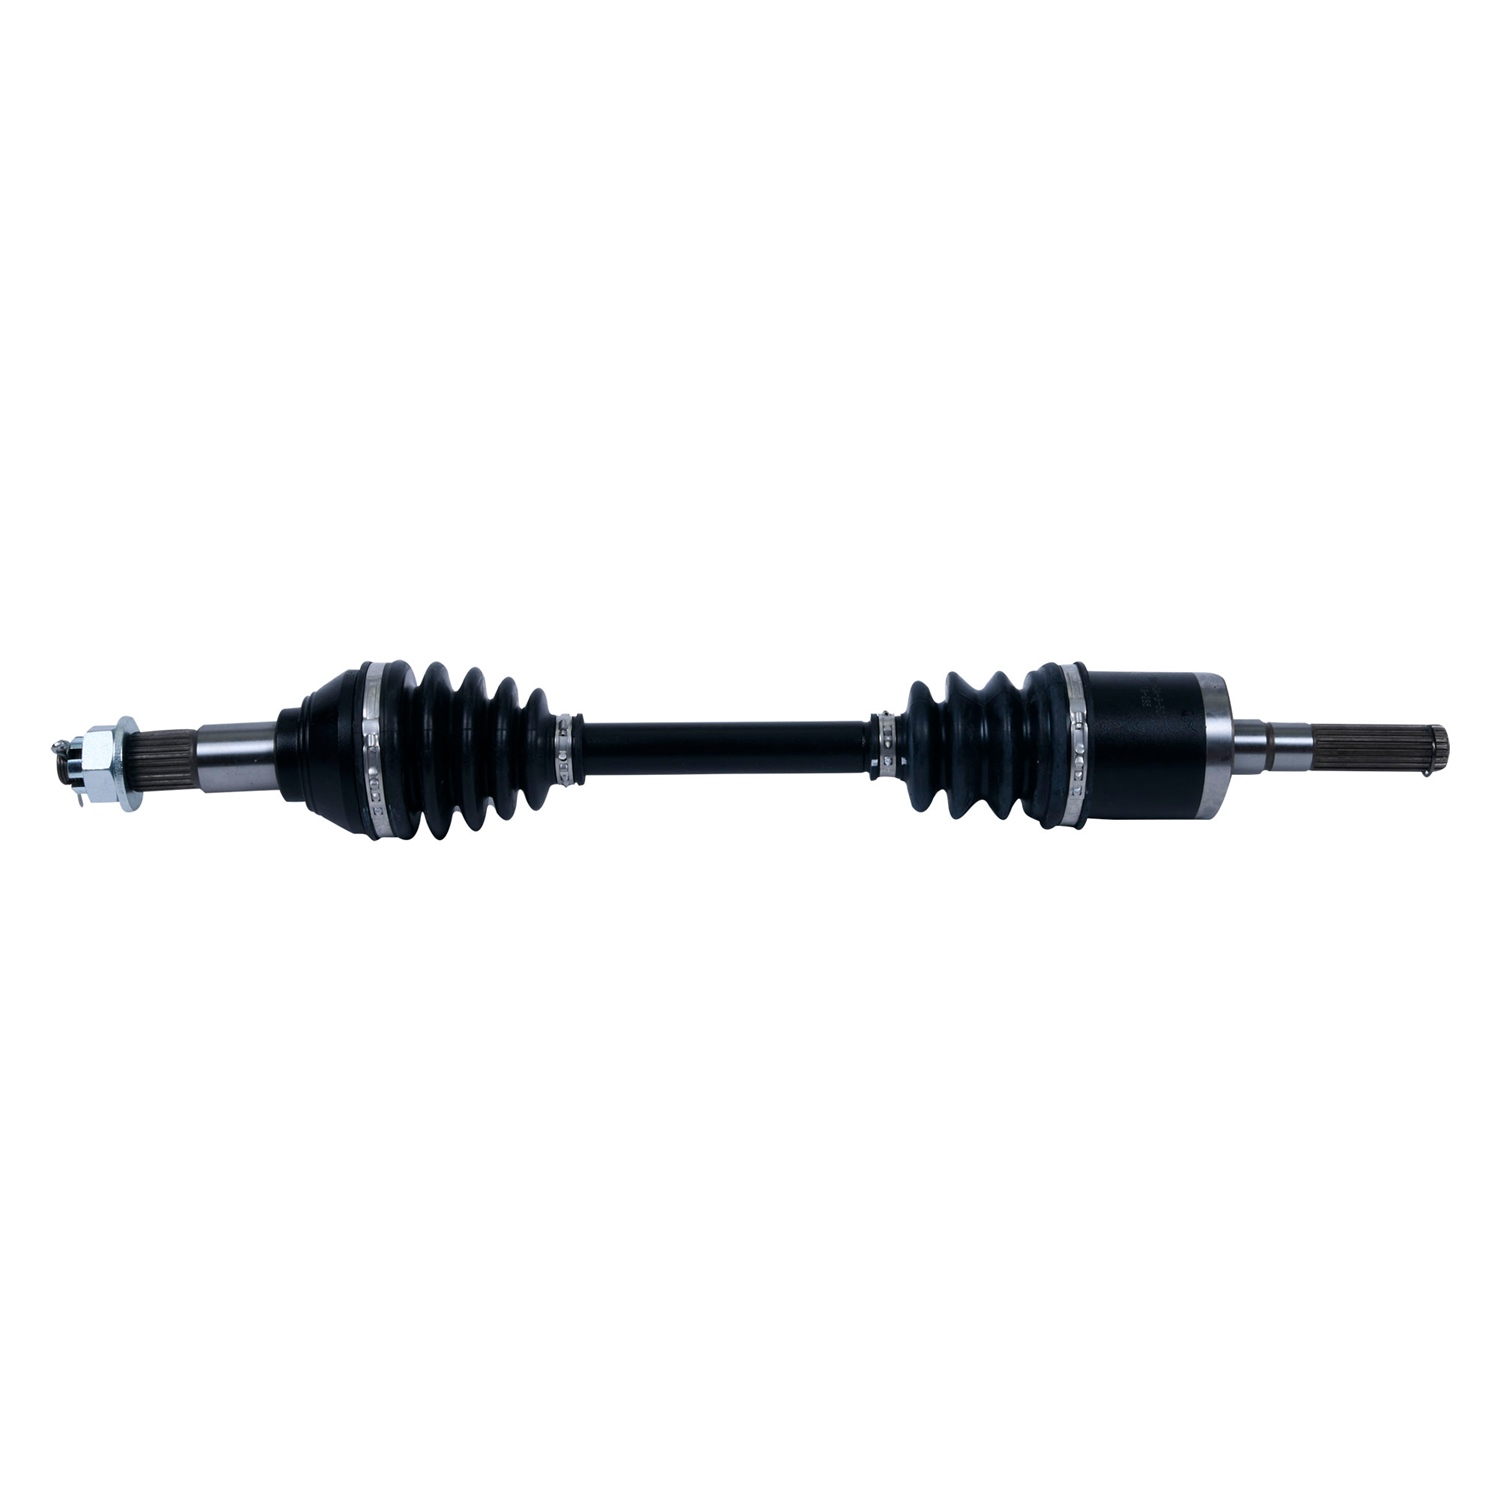 ALL-BALLS 8 Ball Extreme Duty Axle | Kimpex Canada